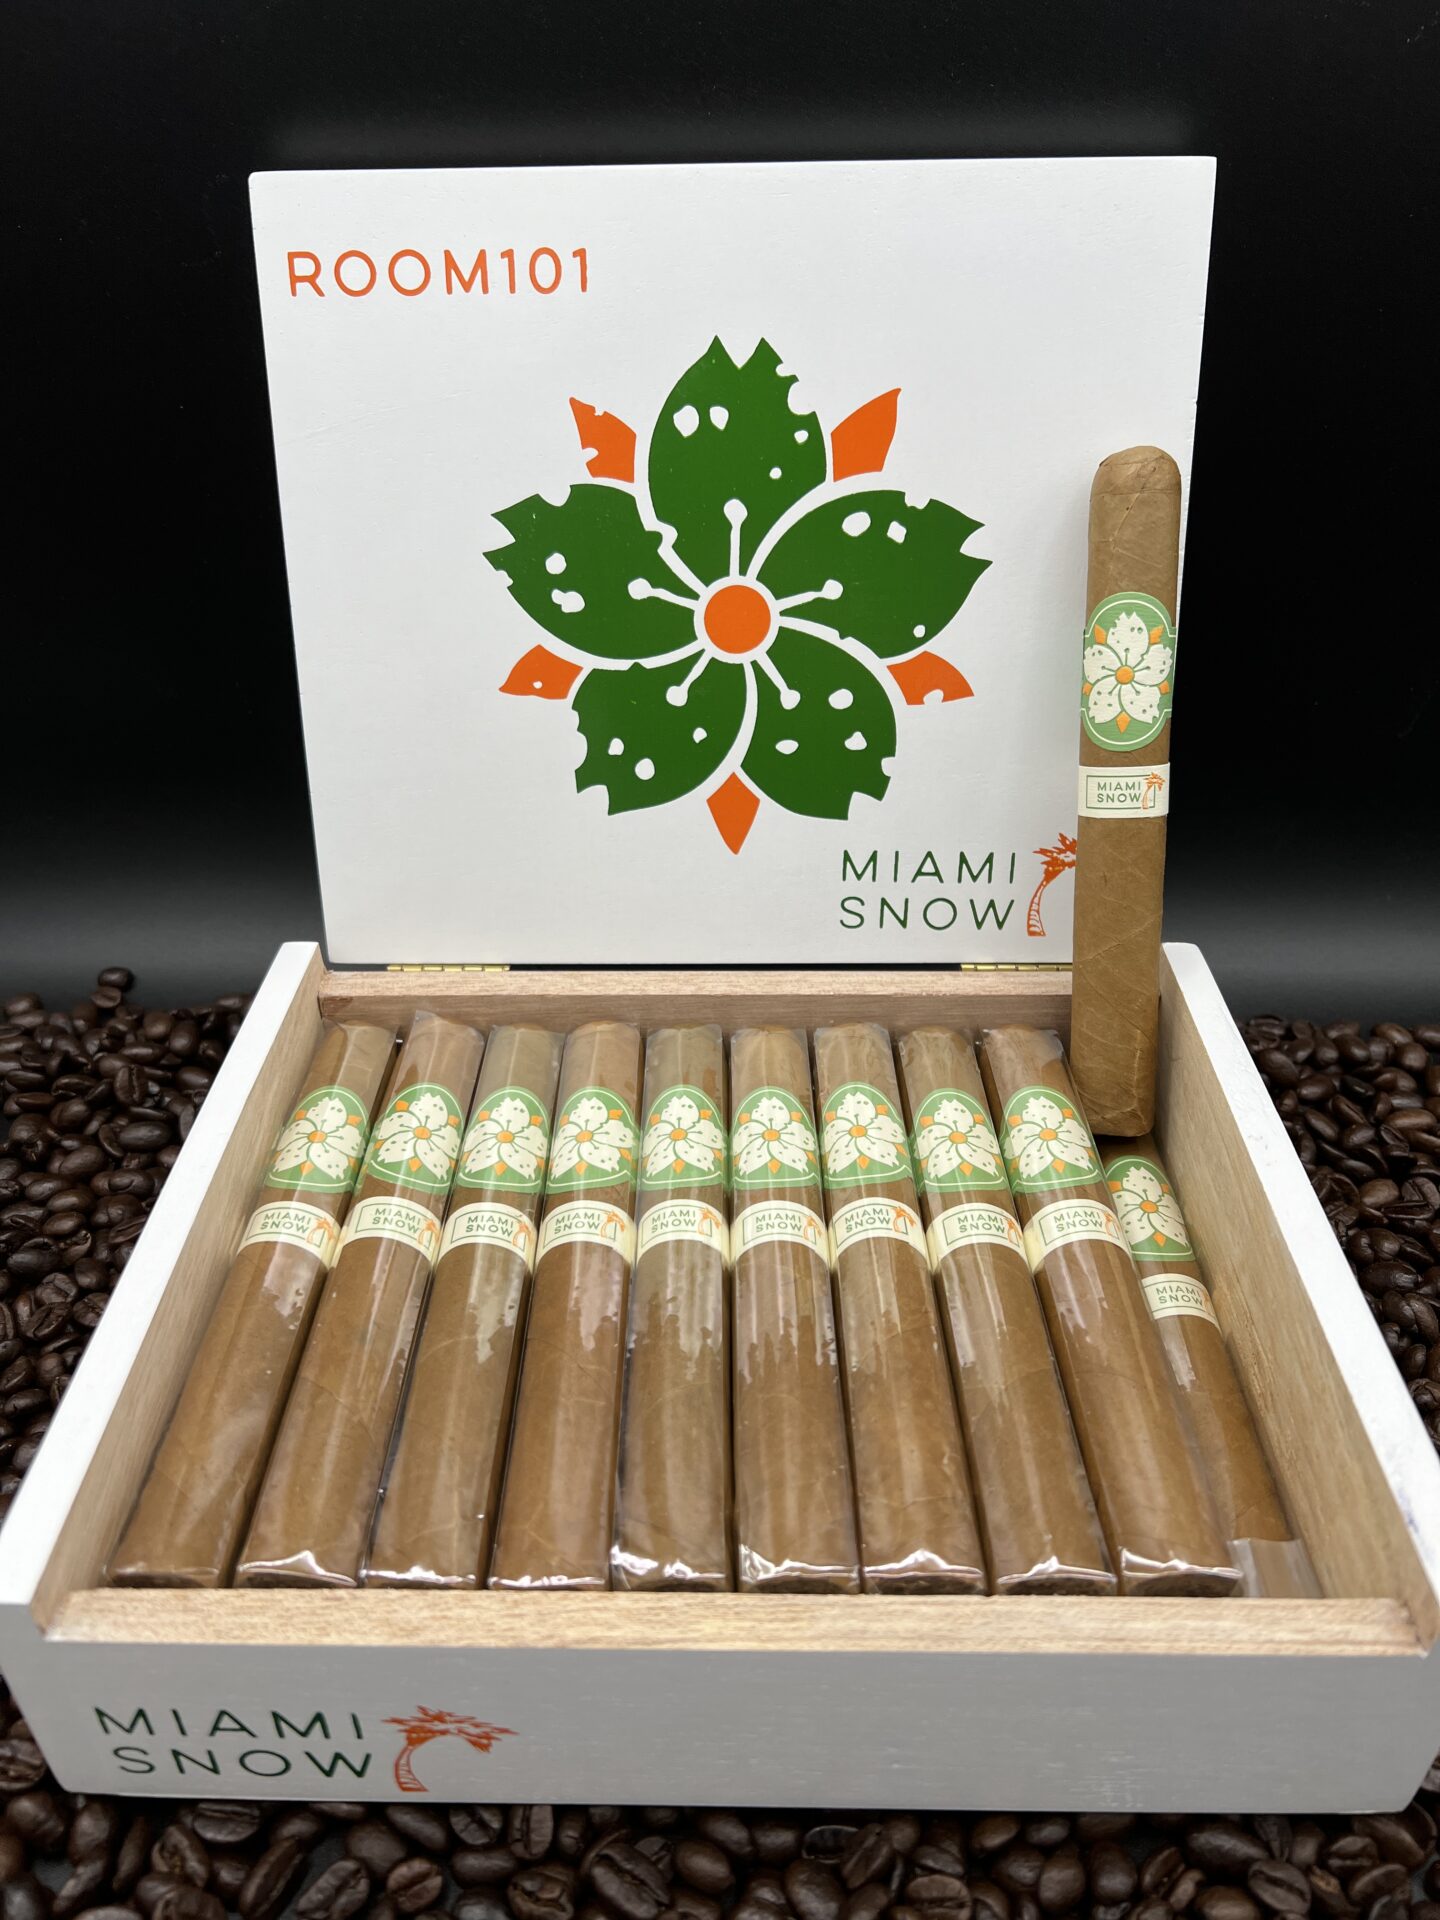 Room 101 - Miami Snow cigars supplied by Sir Louis Cigars